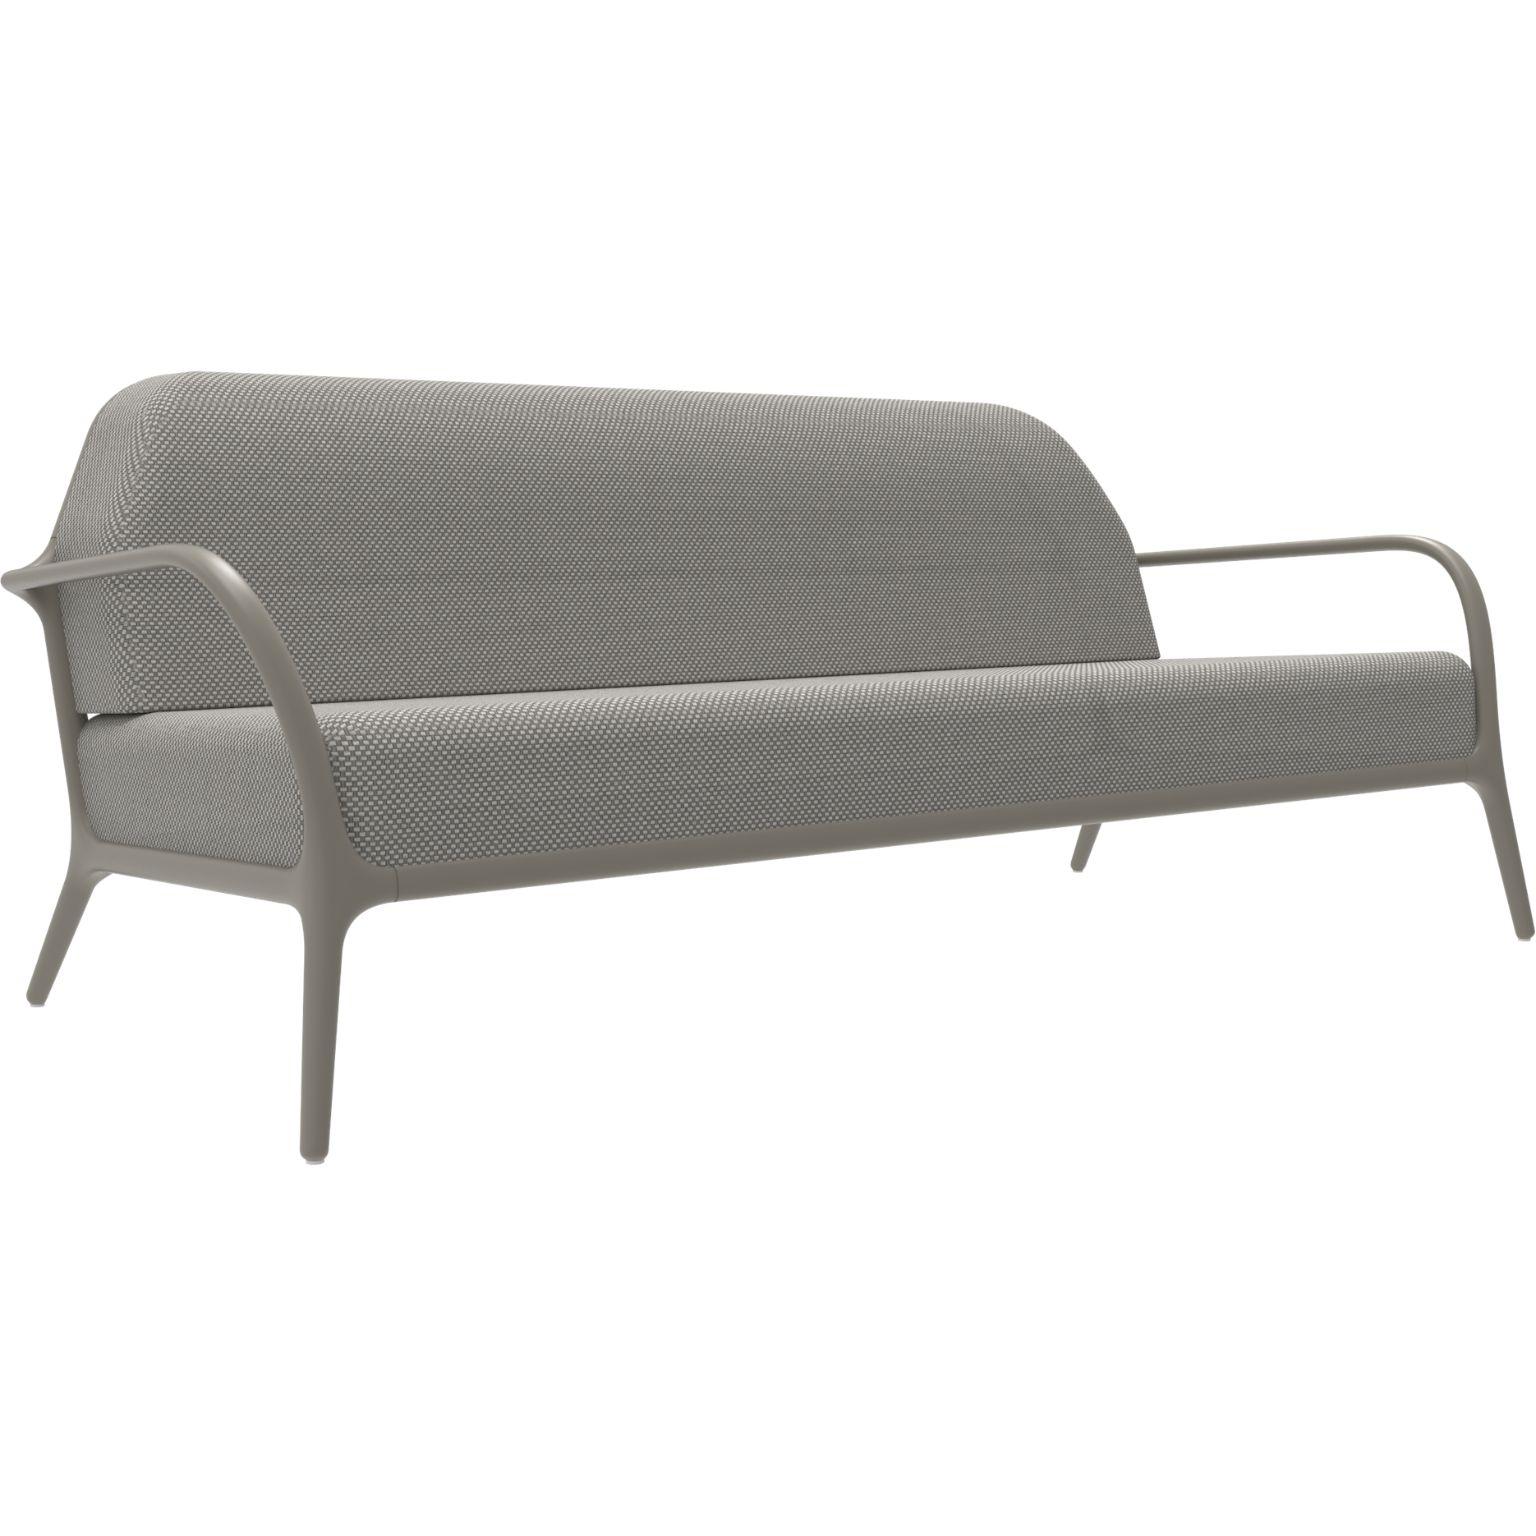 Xaloc cream sofa by MOWEE
Dimensions: D100 x W200 x H81 cm (Seat Height 42 cm)
Material: aluminium, textile
Weight: 46 kg
Also available in different colours and finishes. 

 Xaloc synthesizes the lines of interior furniture to extrapolate to